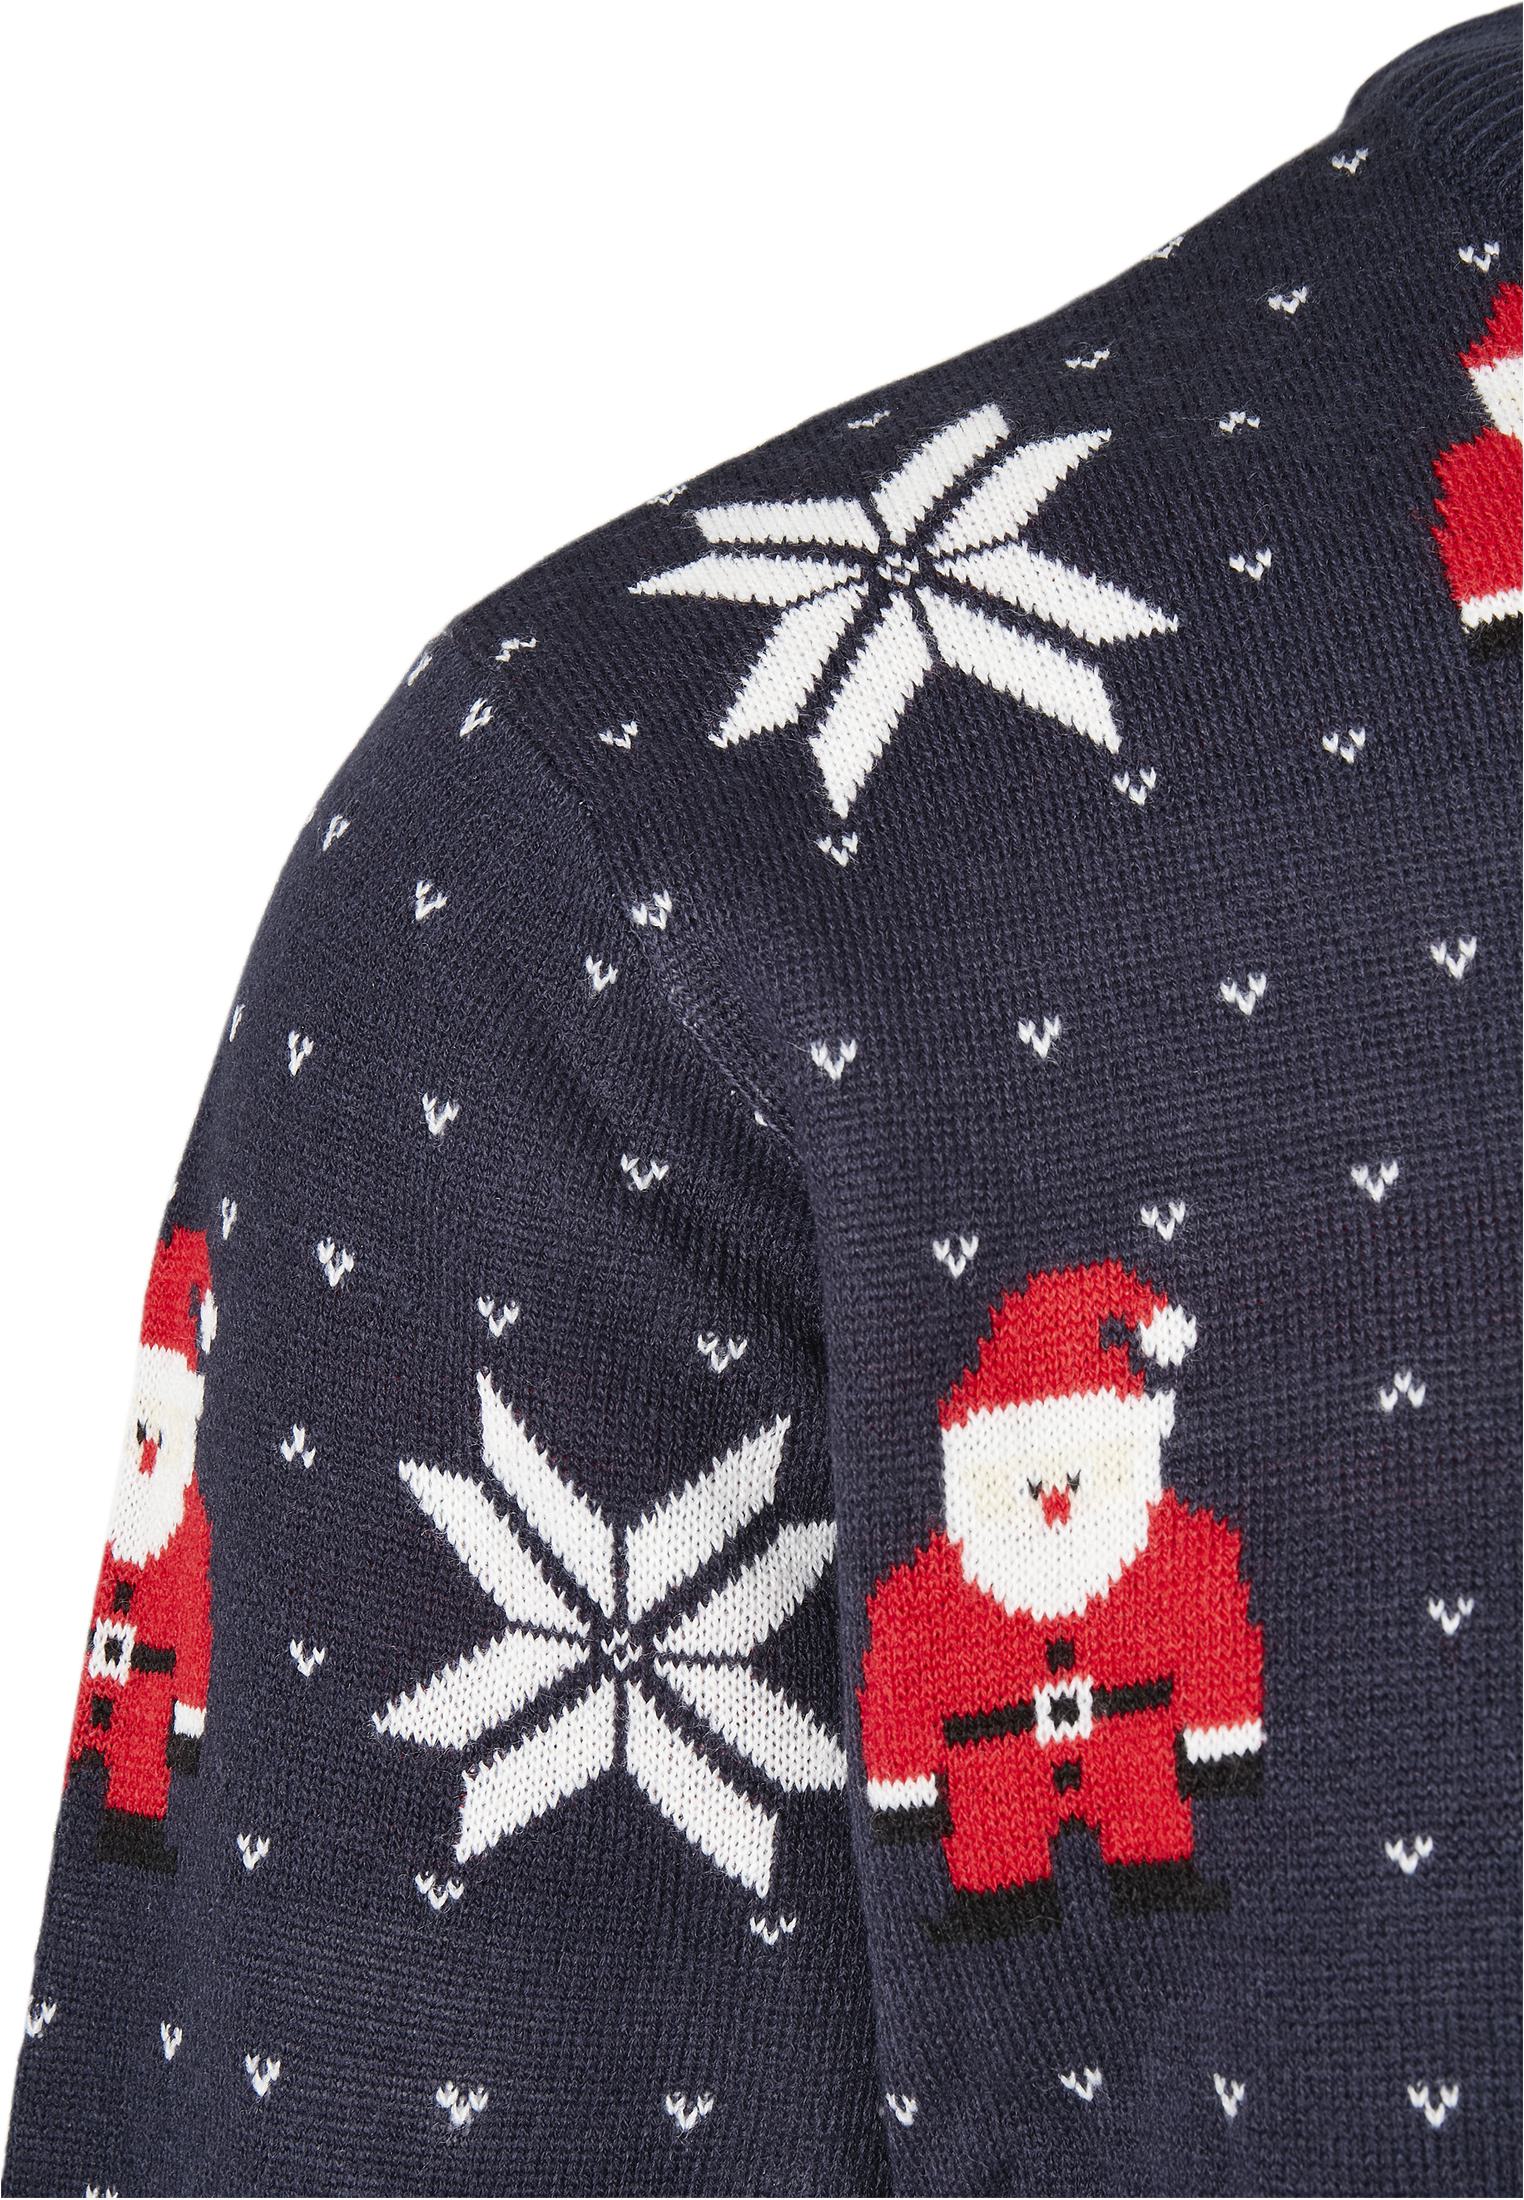 UC Men Nicolaus And Snowflakes Sweater (Farbe: nicolaus and snowflake aop / Größe: L)